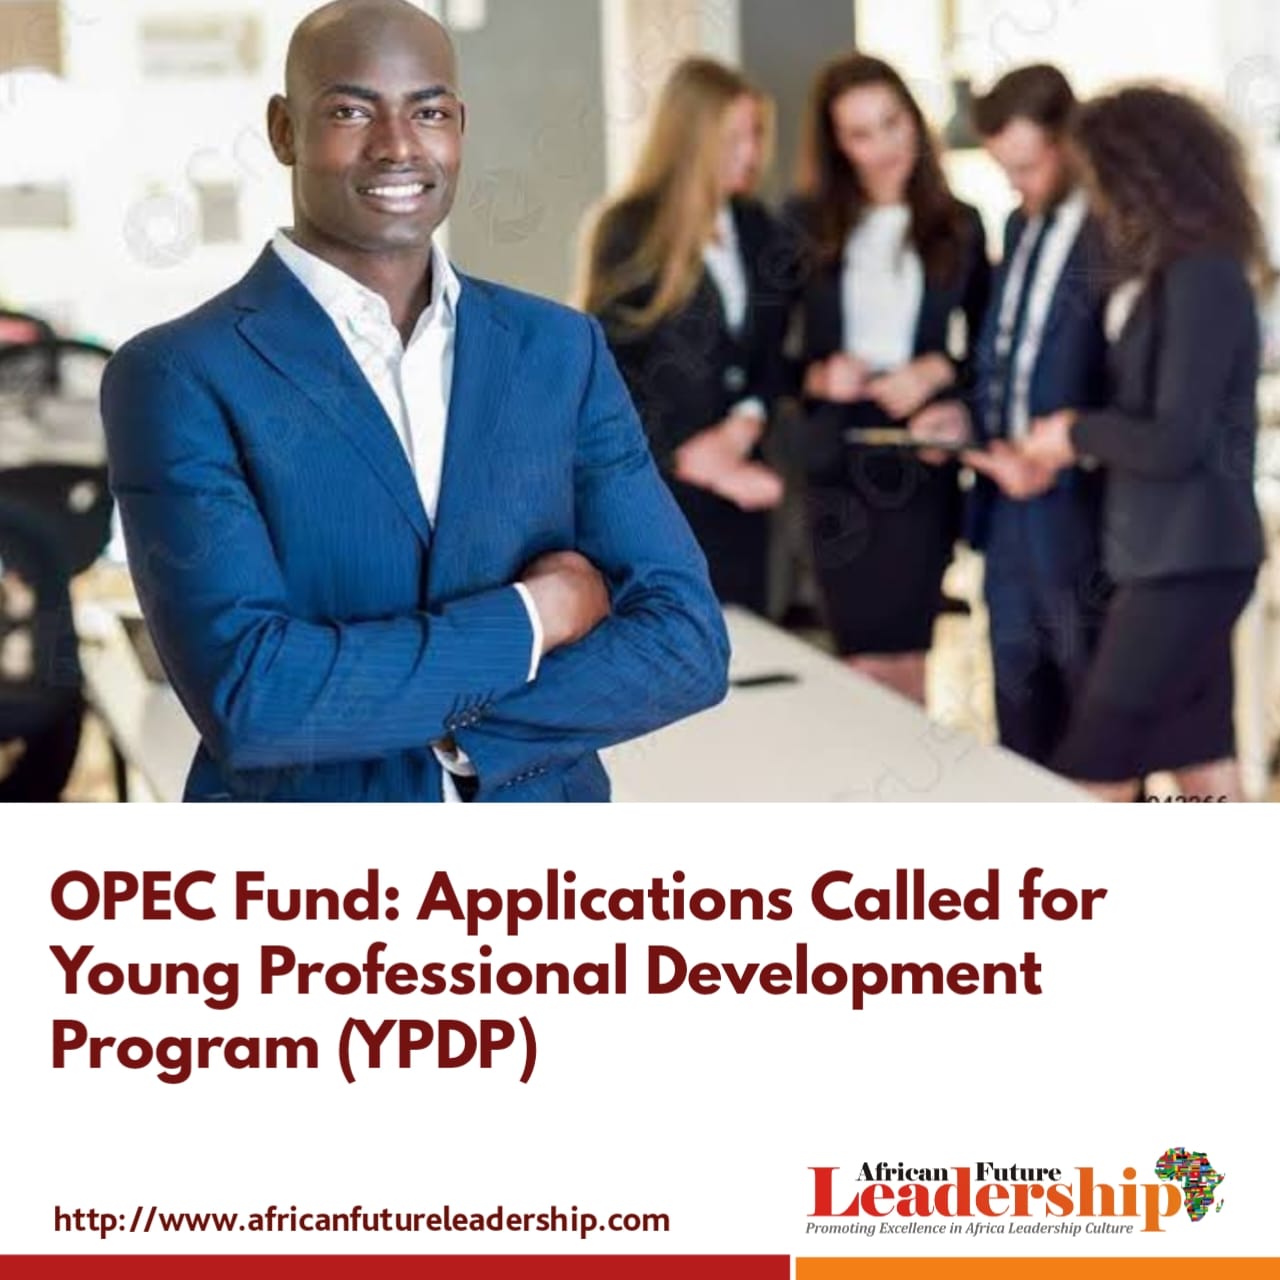 OPEC Fund: Applications Called for Young Professional Development Program (YPDP)